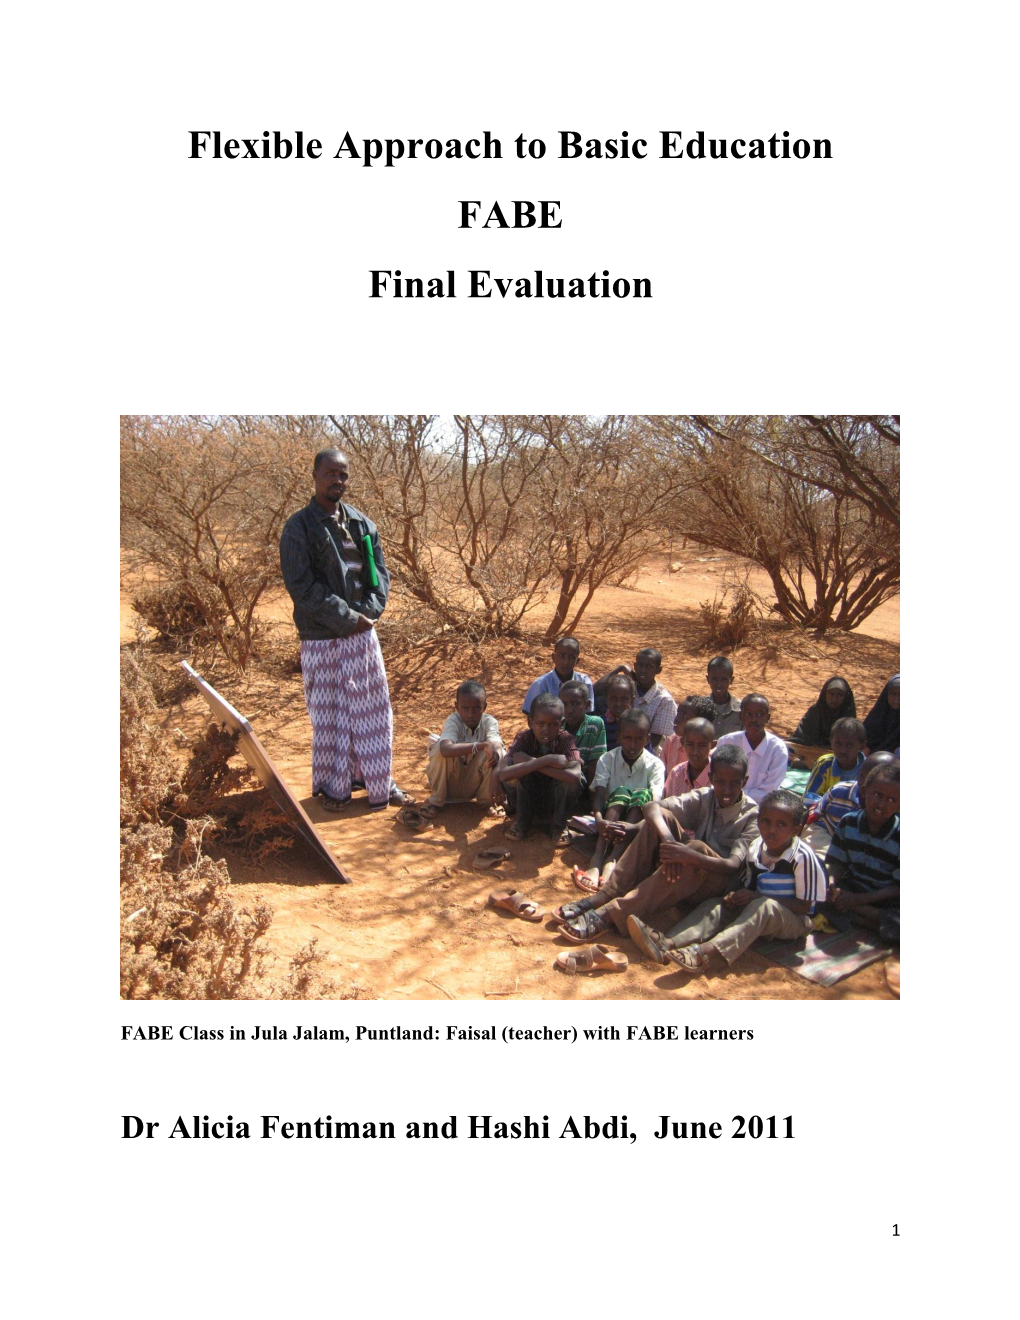 Flexible Approach to Basic Education FABE: Final Evaluation